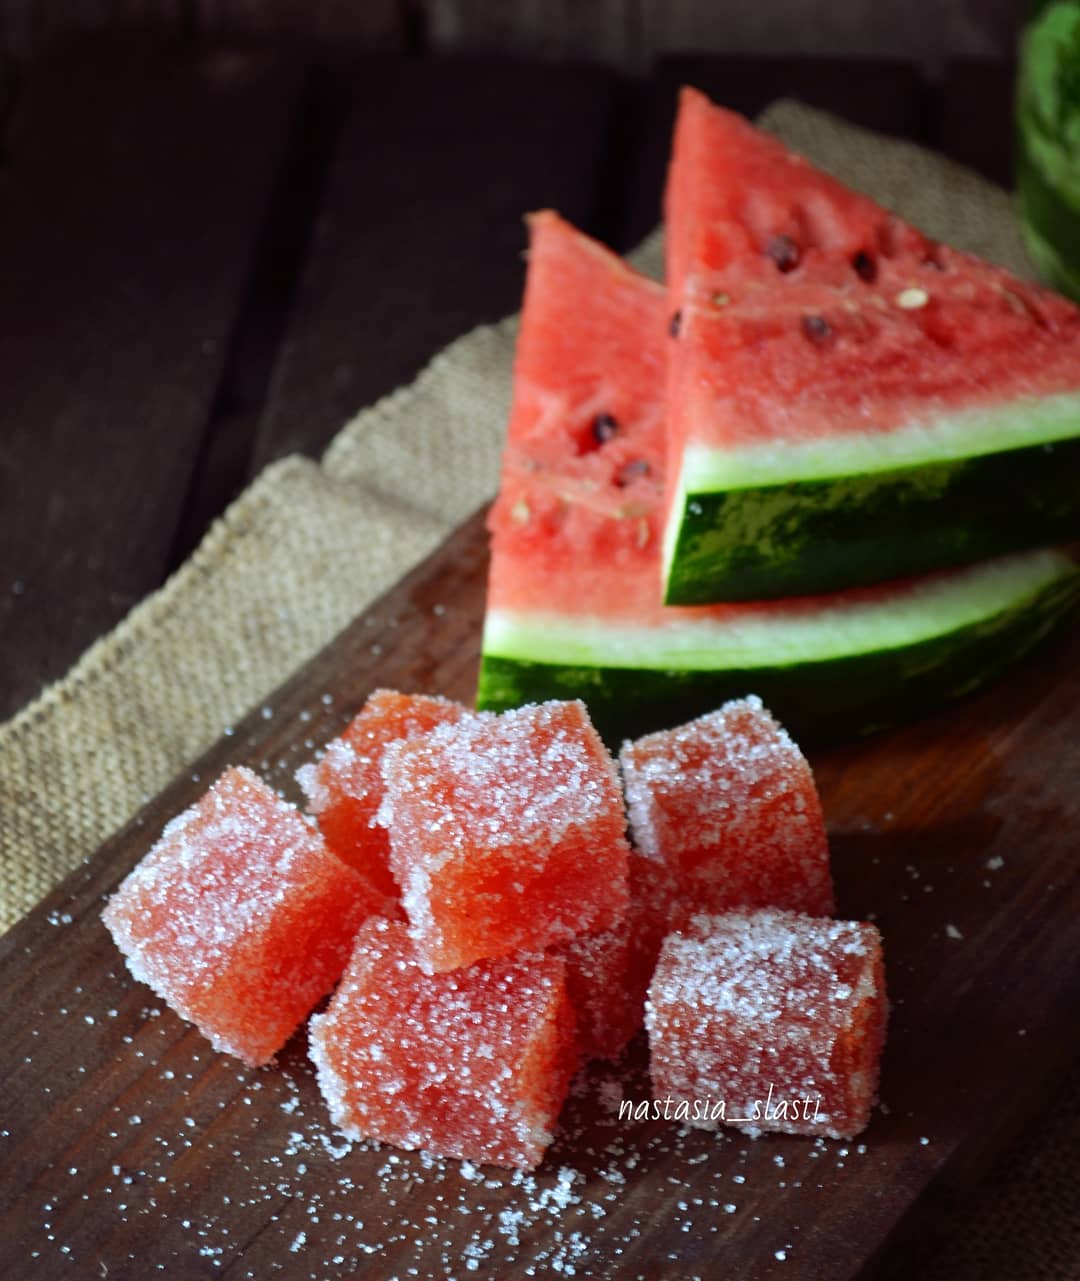 Watermelon jelly sweets